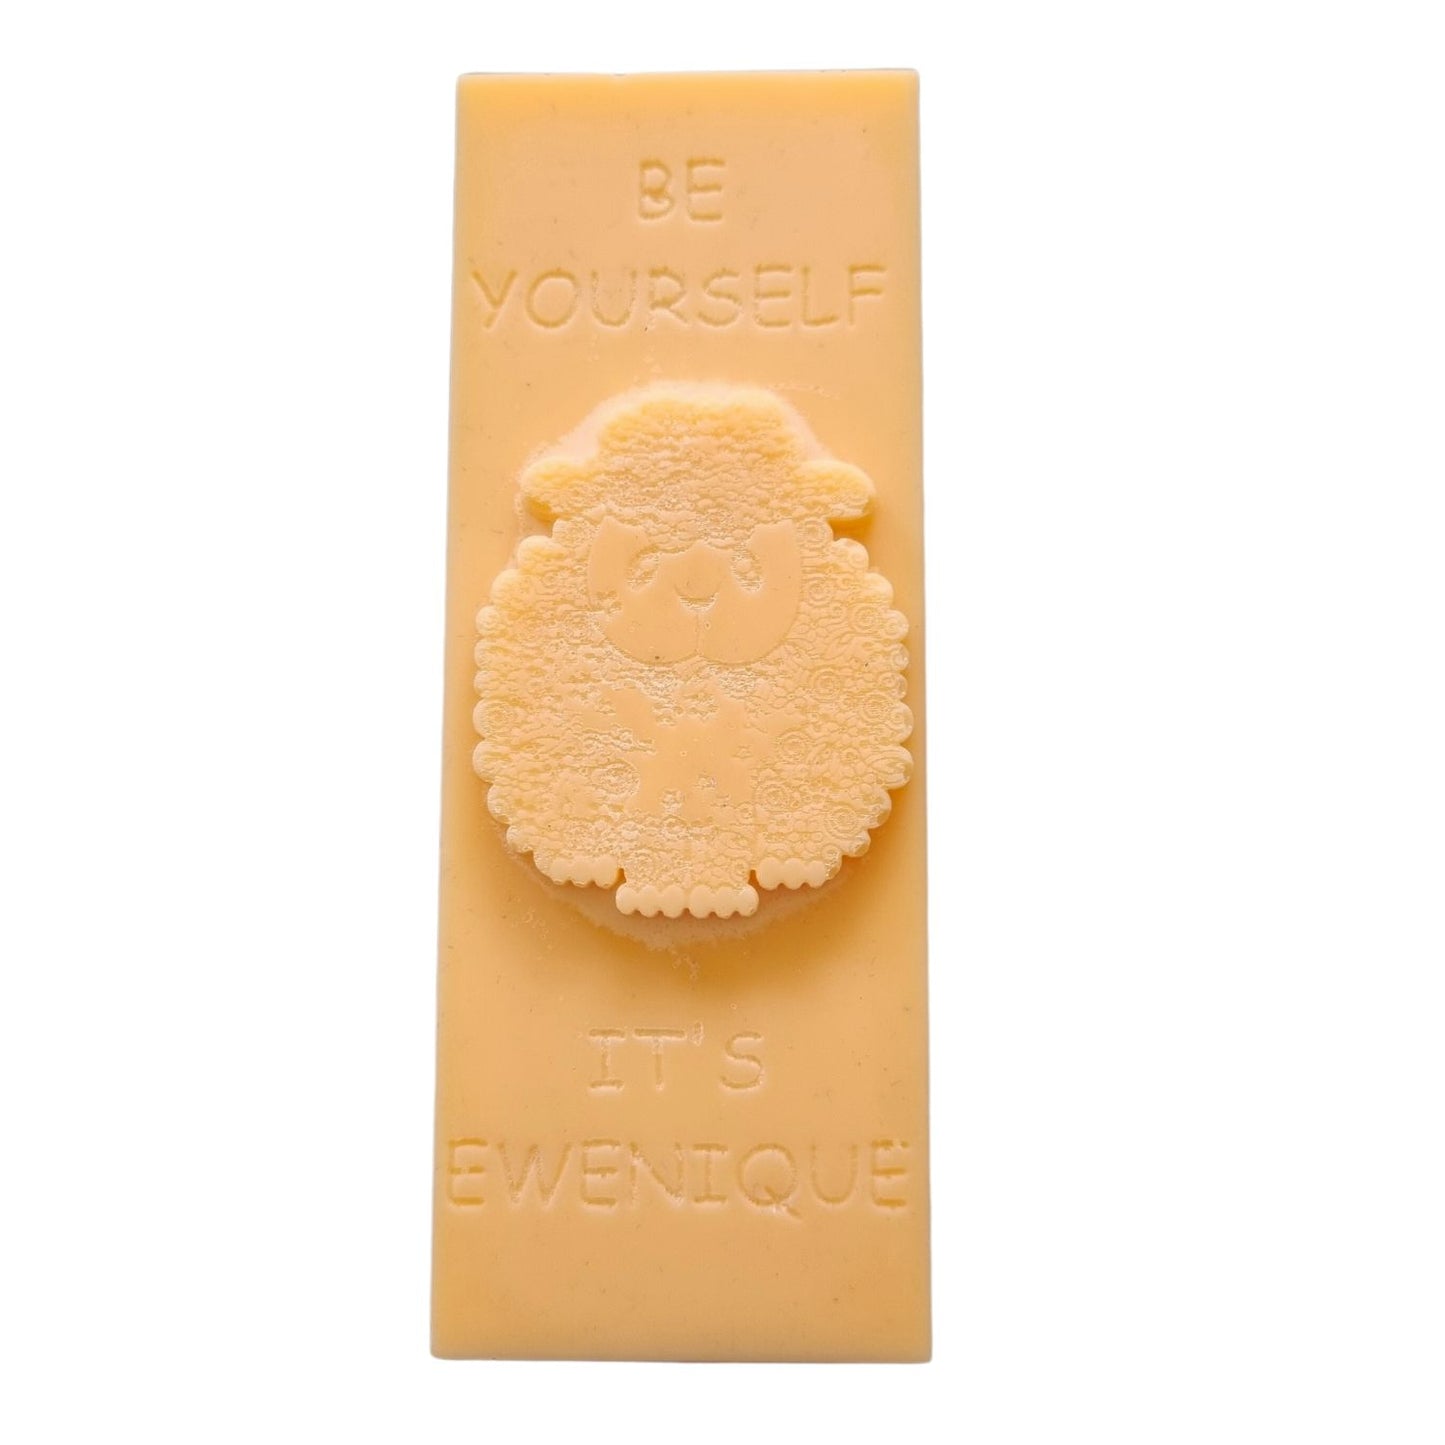 An orange coloured rectangle of wax with a raised sheep design with the writing be yourself above and it's ewenique below.